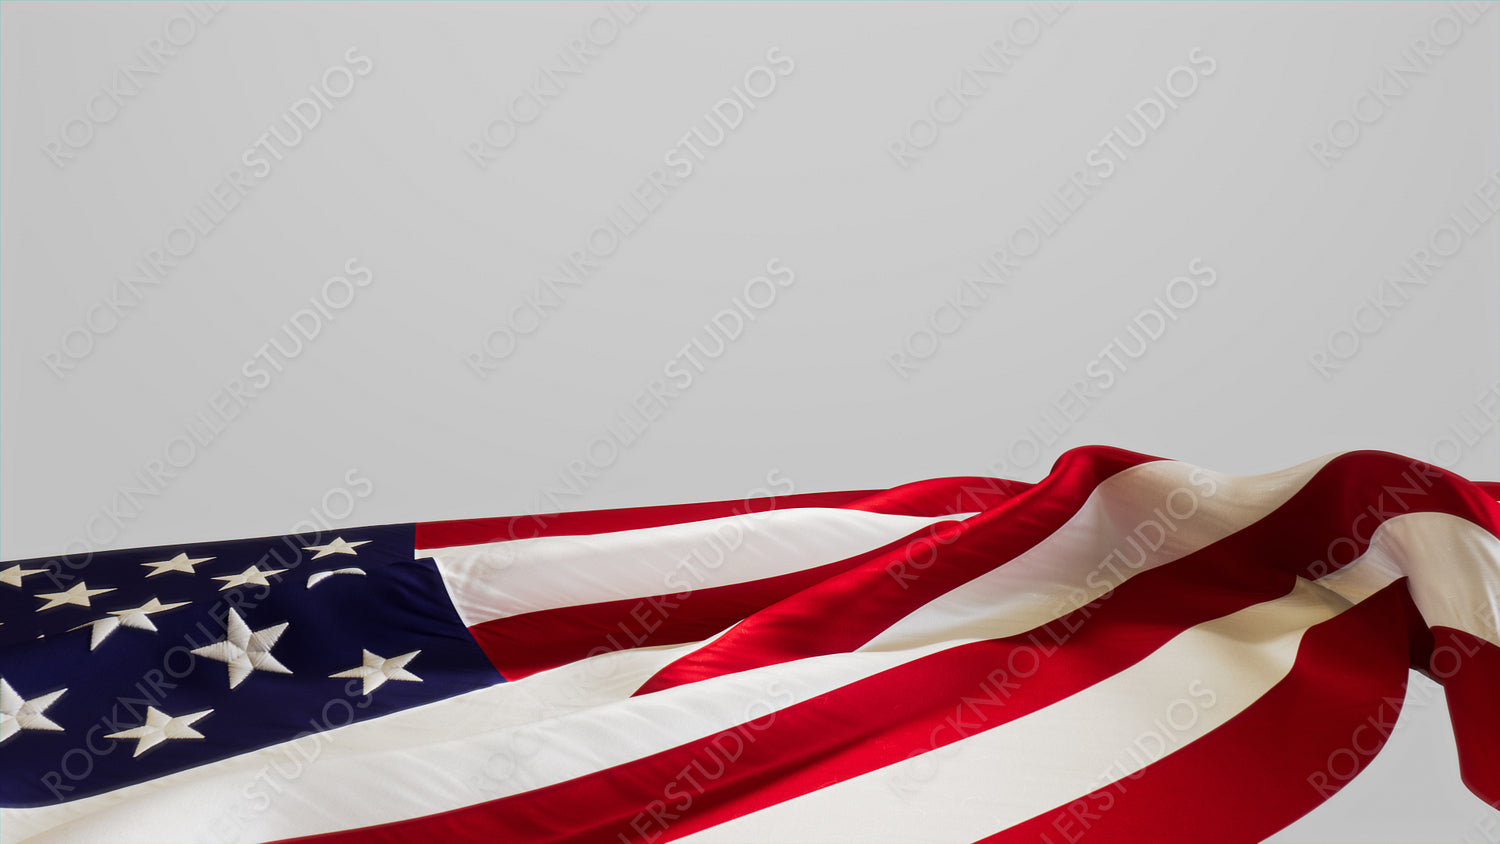 Veterans Day Banner with United States Flag, Isolated on White Background with Copy-Space.